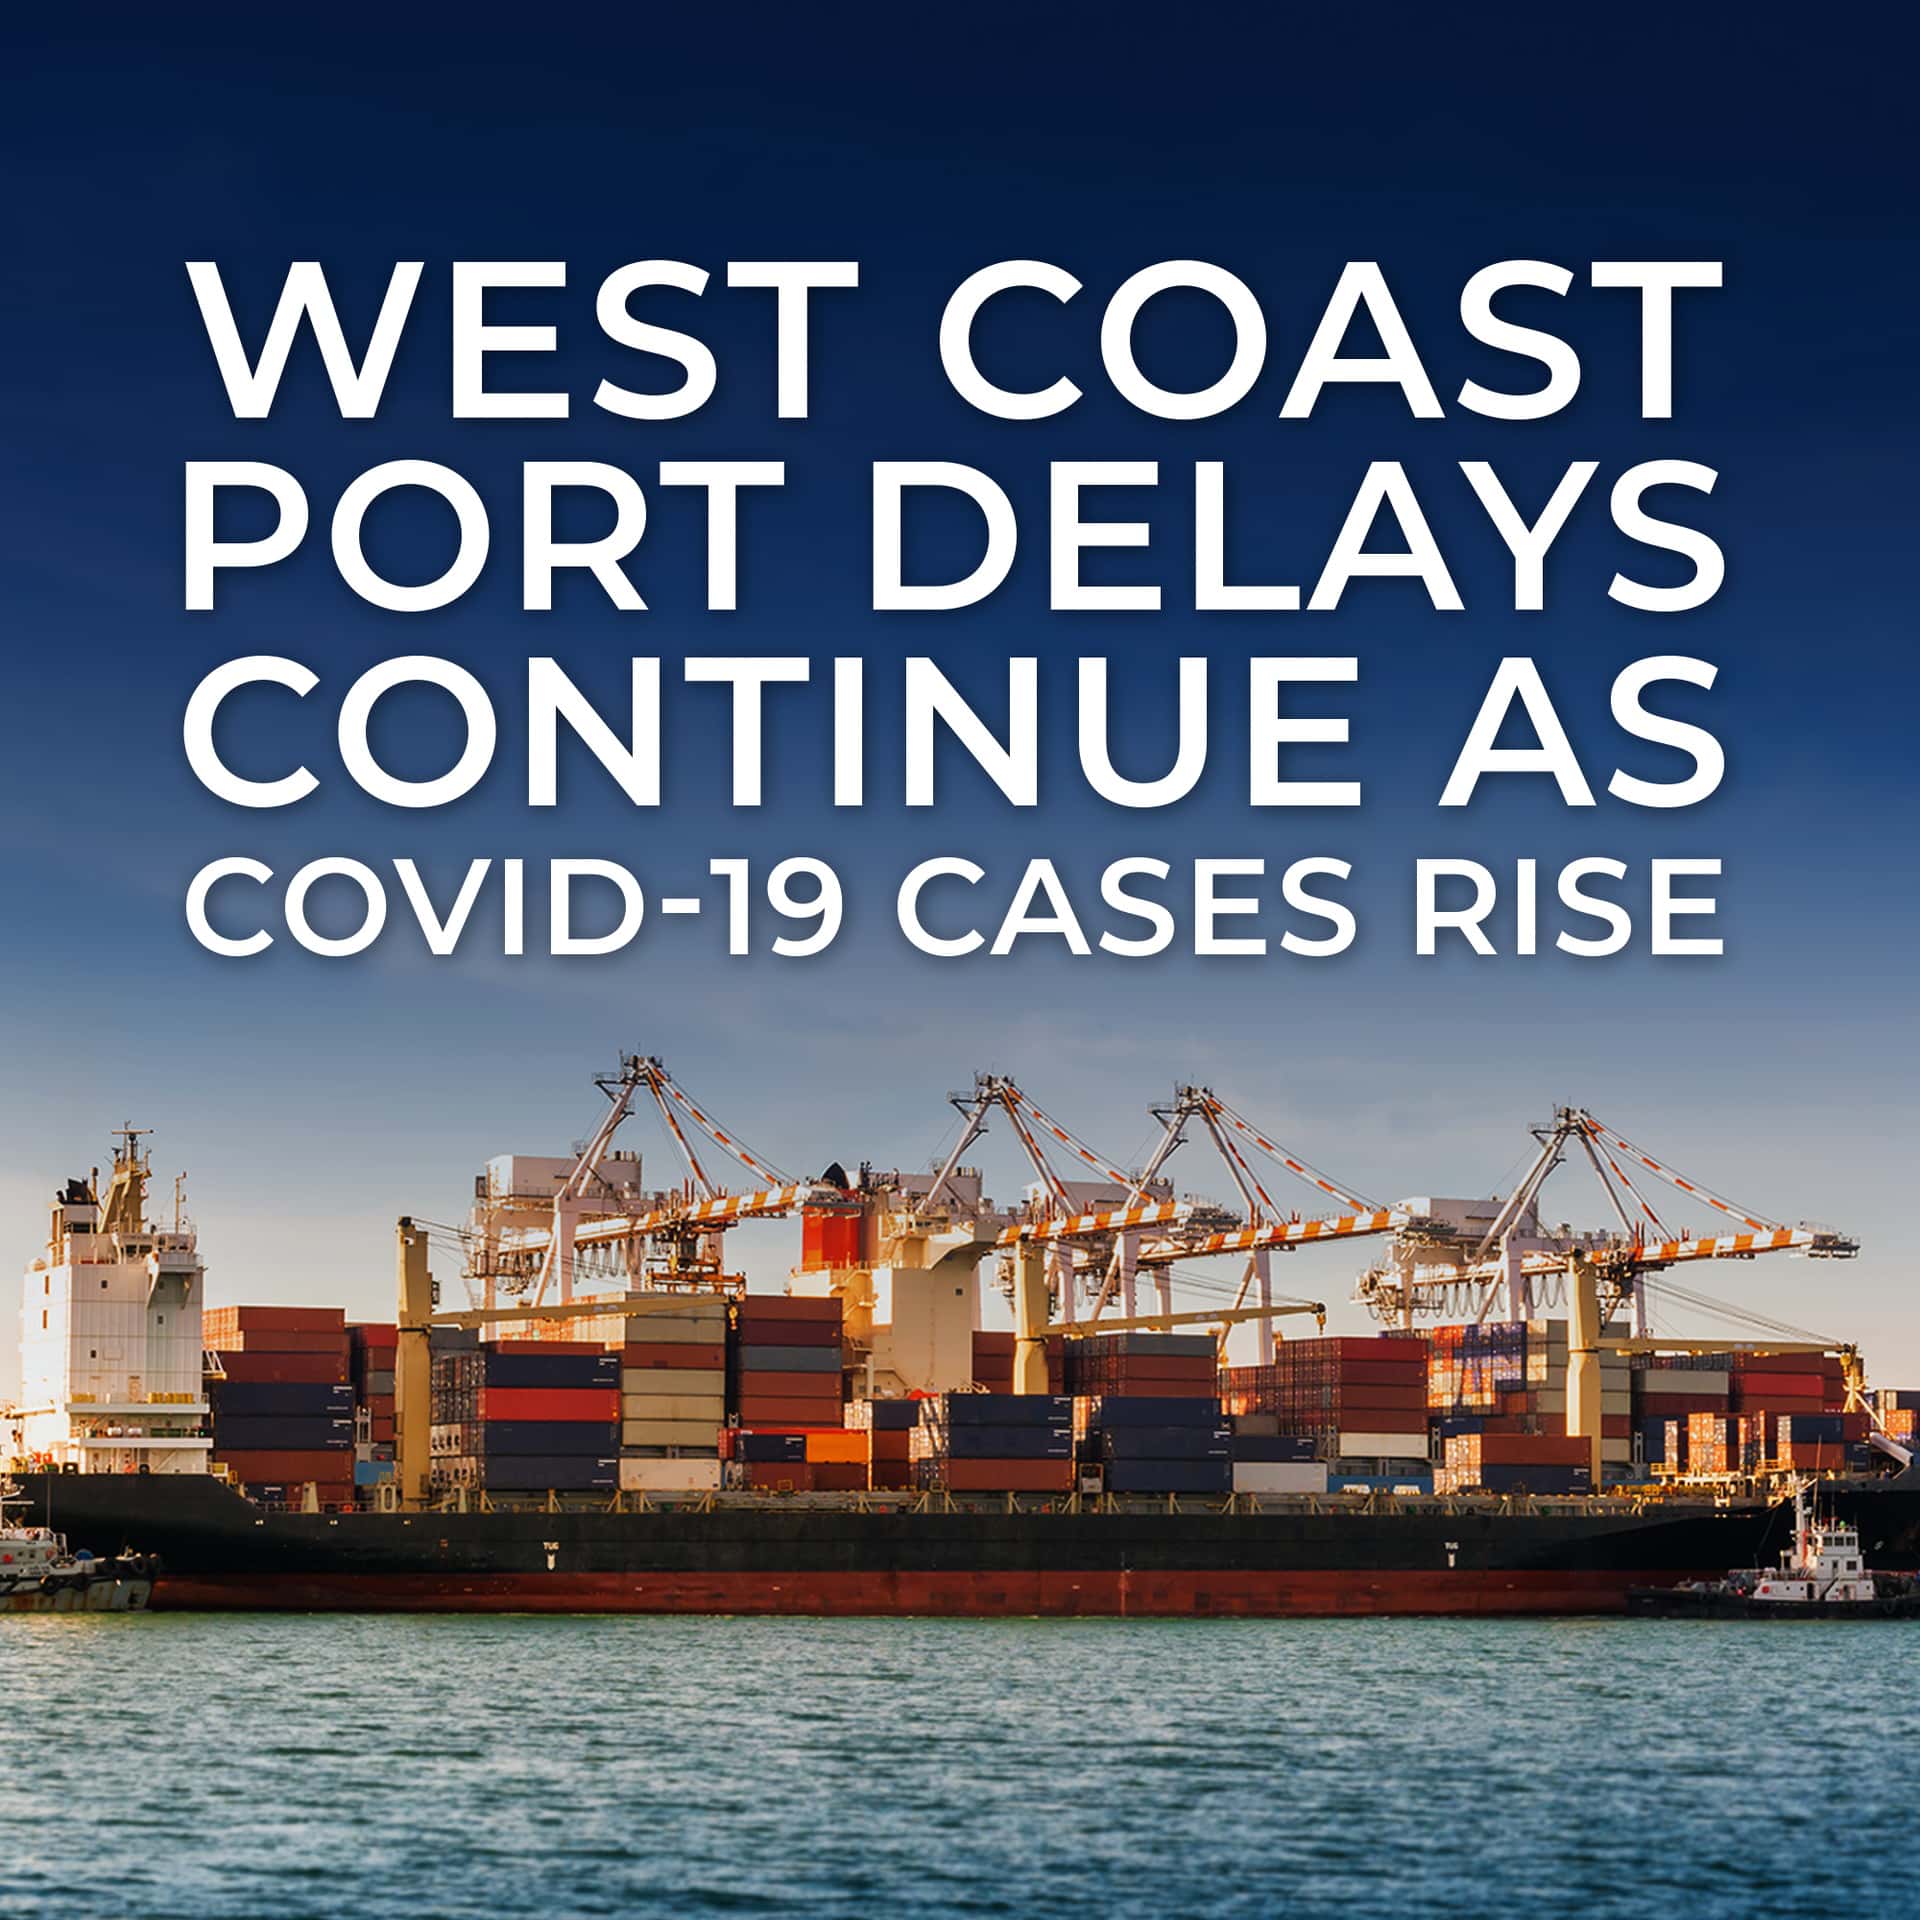 West Coast Port Delays Continue as Covid-19 Cases Rise